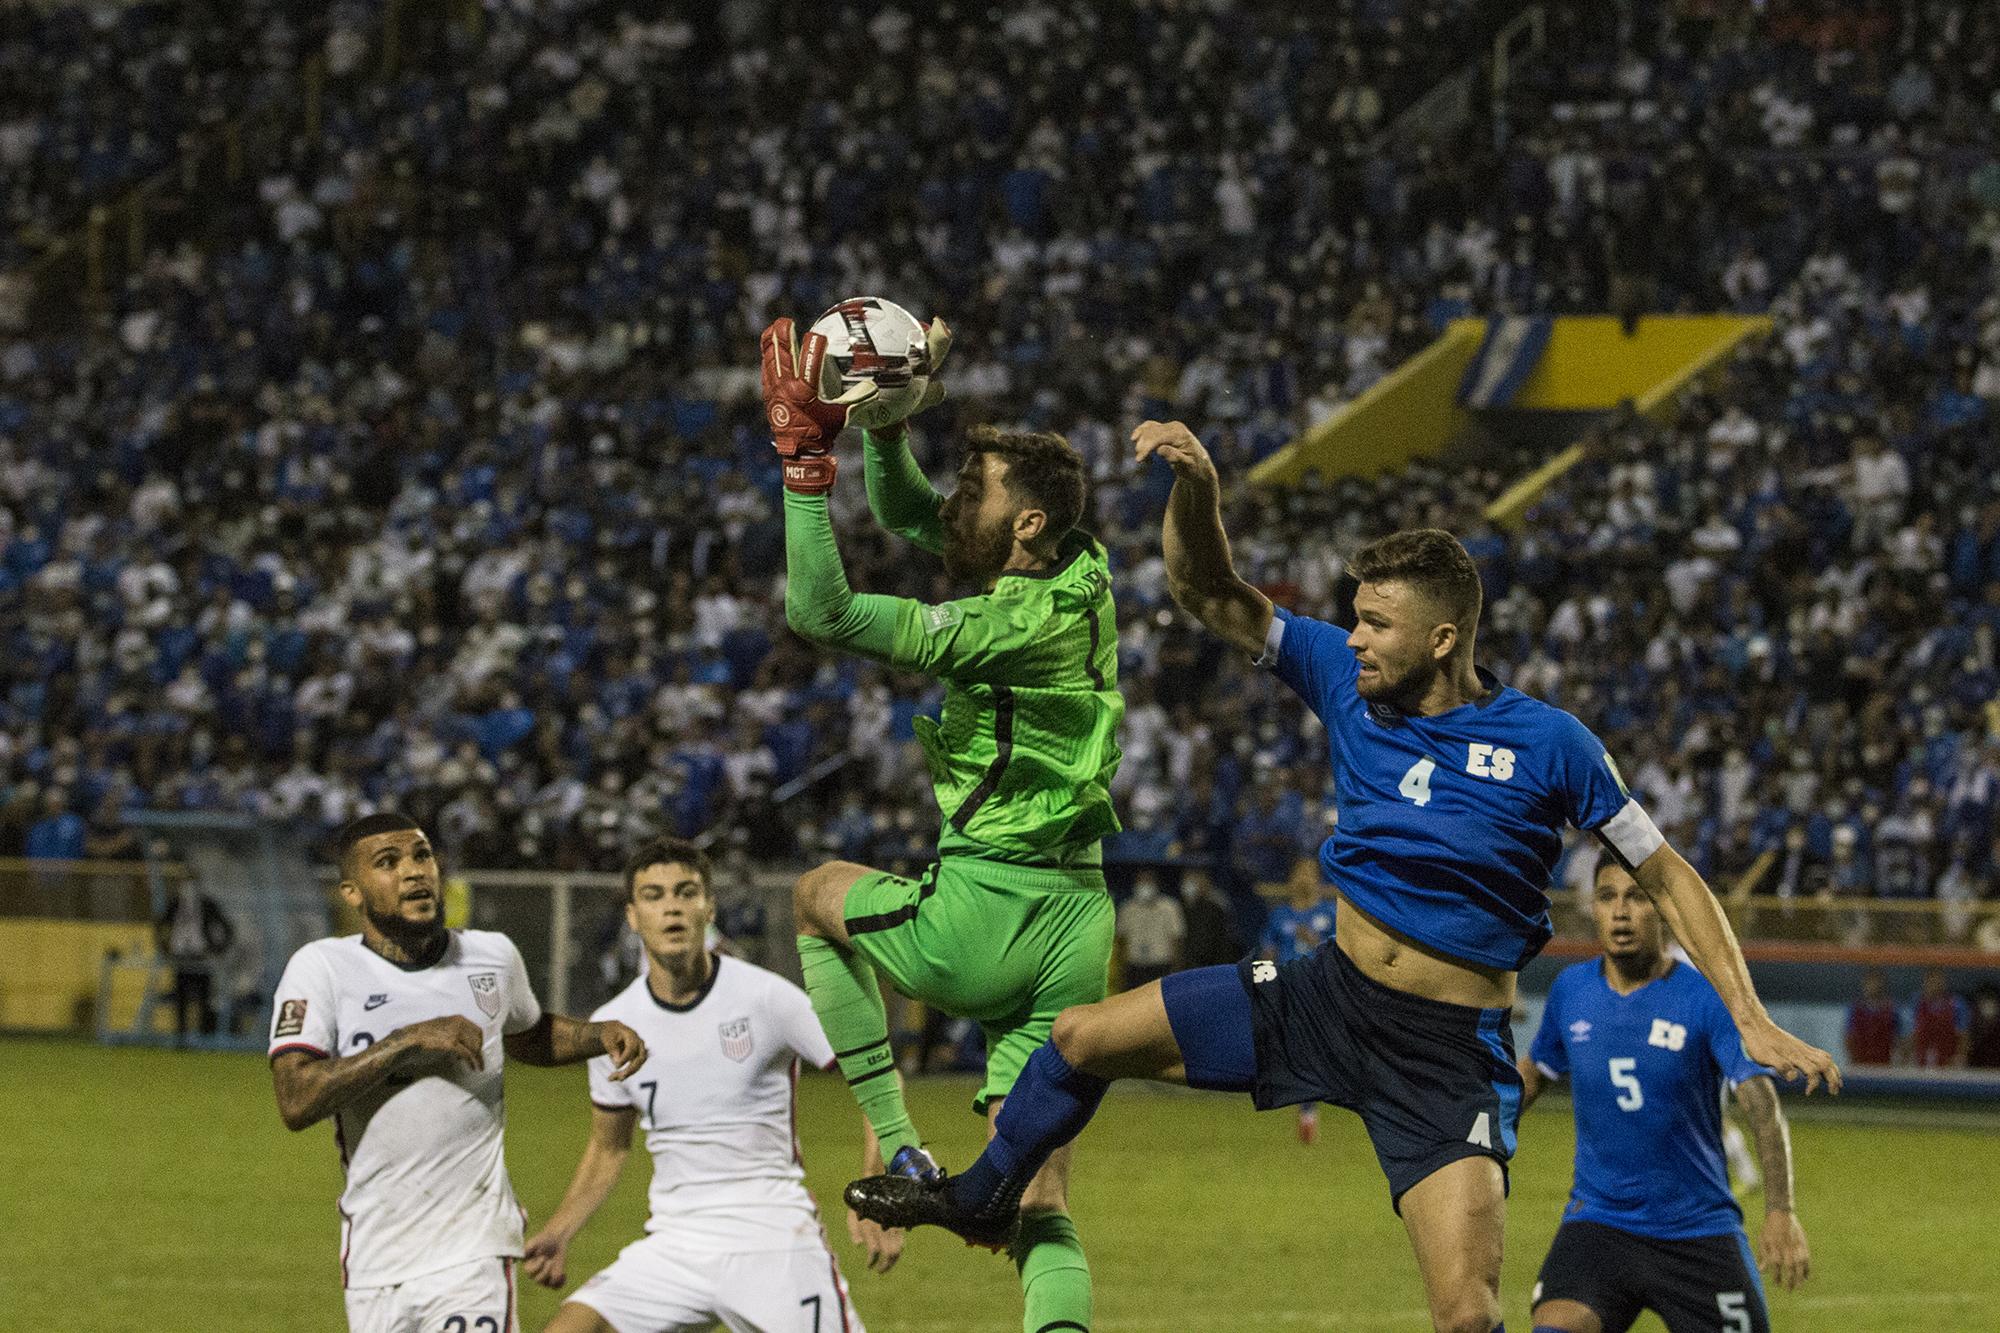 Eriq Zavaleta competes for the ball against U.S. goalkeeper Matt Turner on September 2, 2021 in Cuscatlán Stadium. Zavaleta played for the United States in a youth World Cup in 2009. Photo: Odir Arriola/El Faro